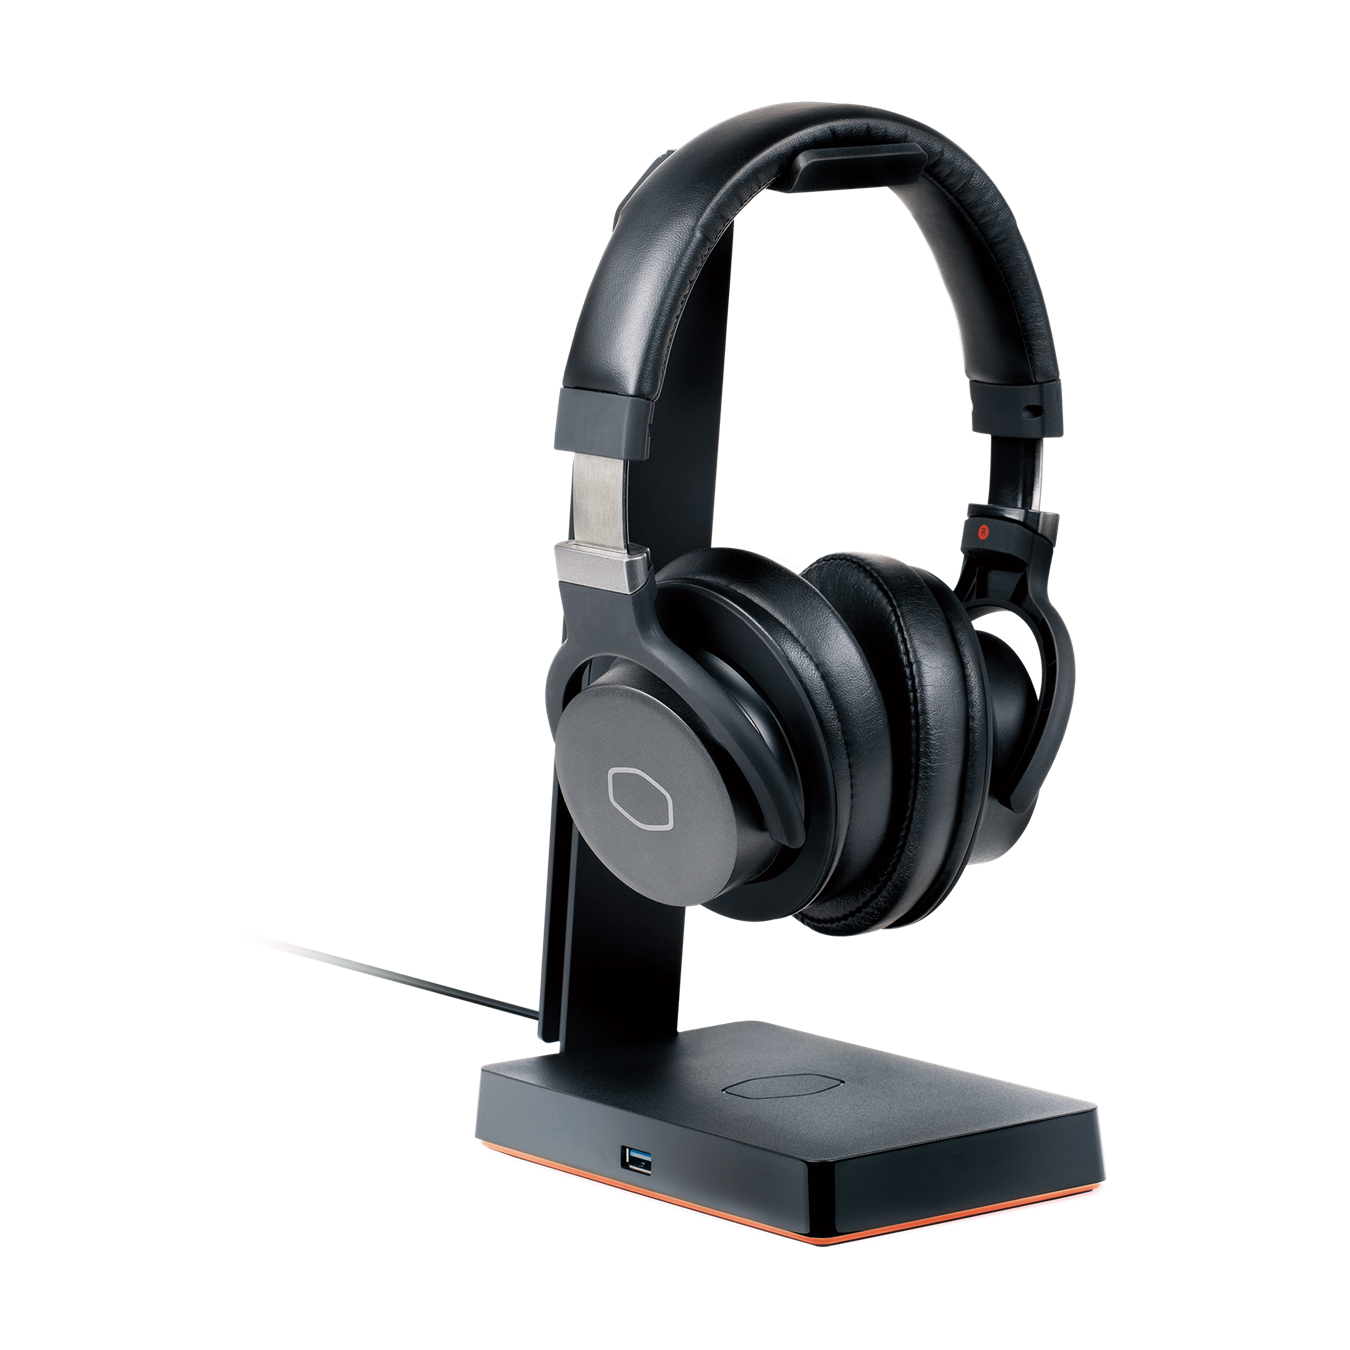 GS750 Qi Wireless Charging Base and Headset